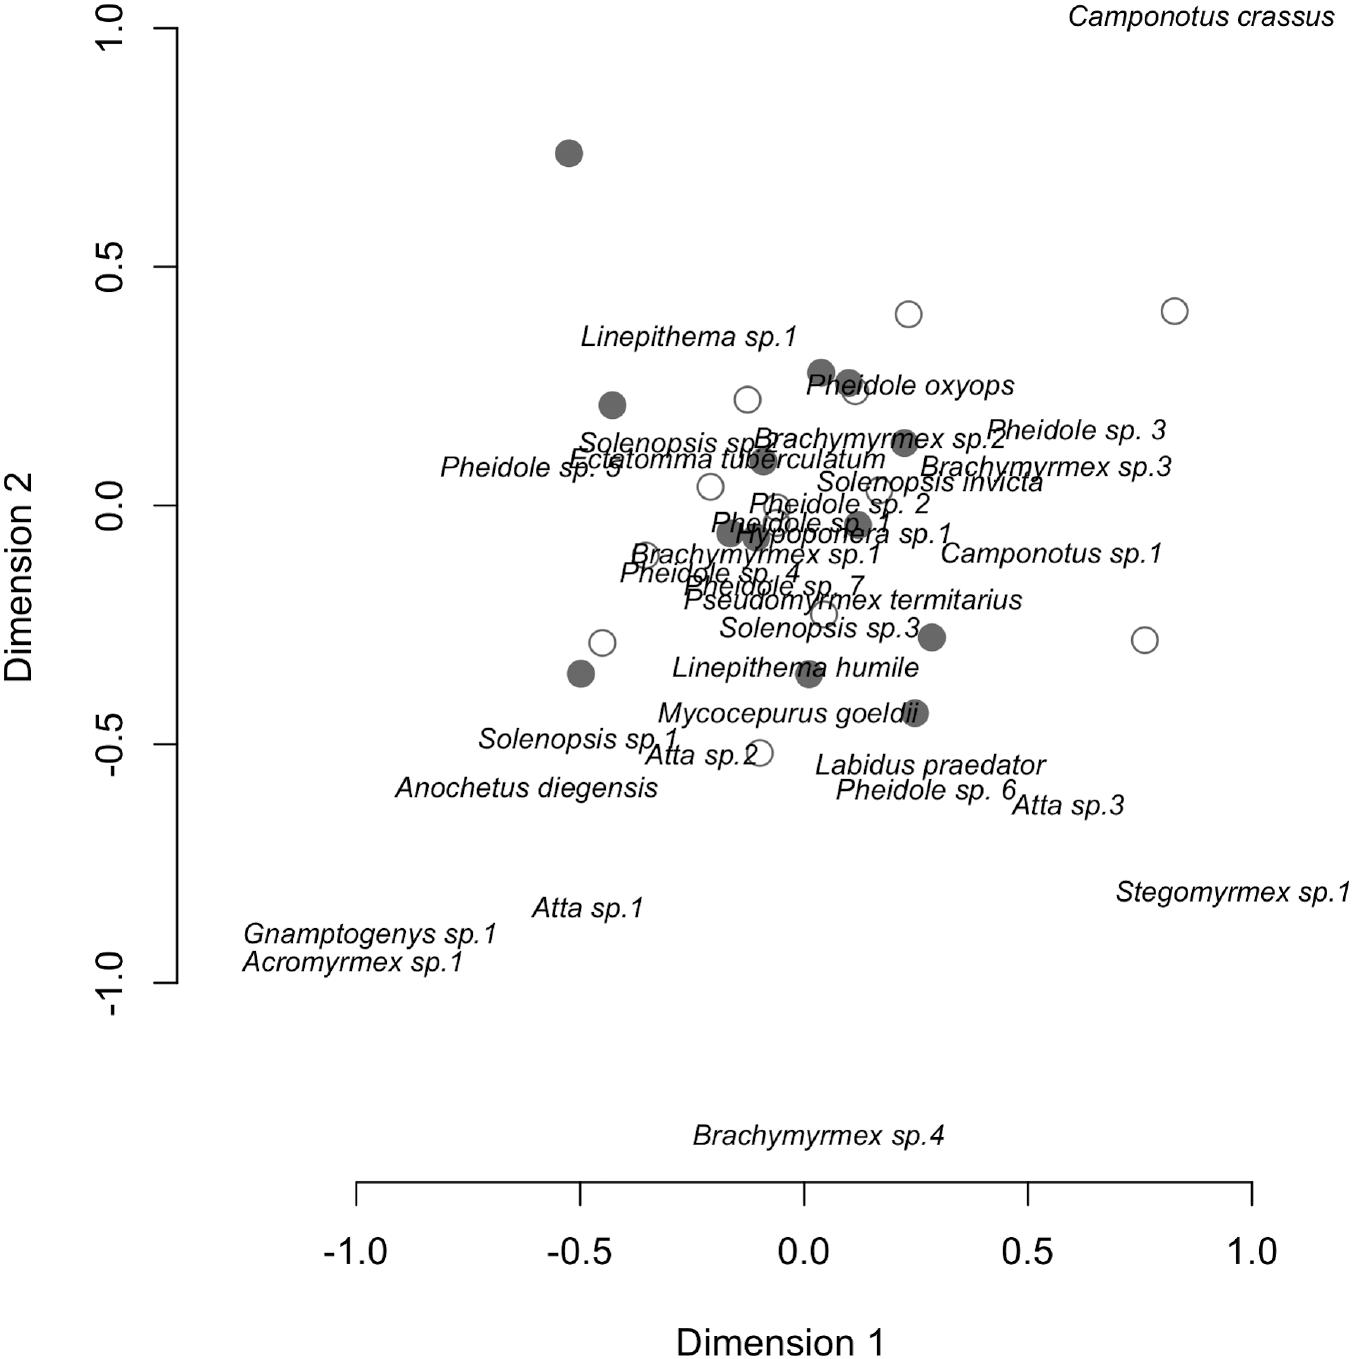 Species Richness And Community Composition Of Ants And Beetles In Bt And Non Bt Maize Fields